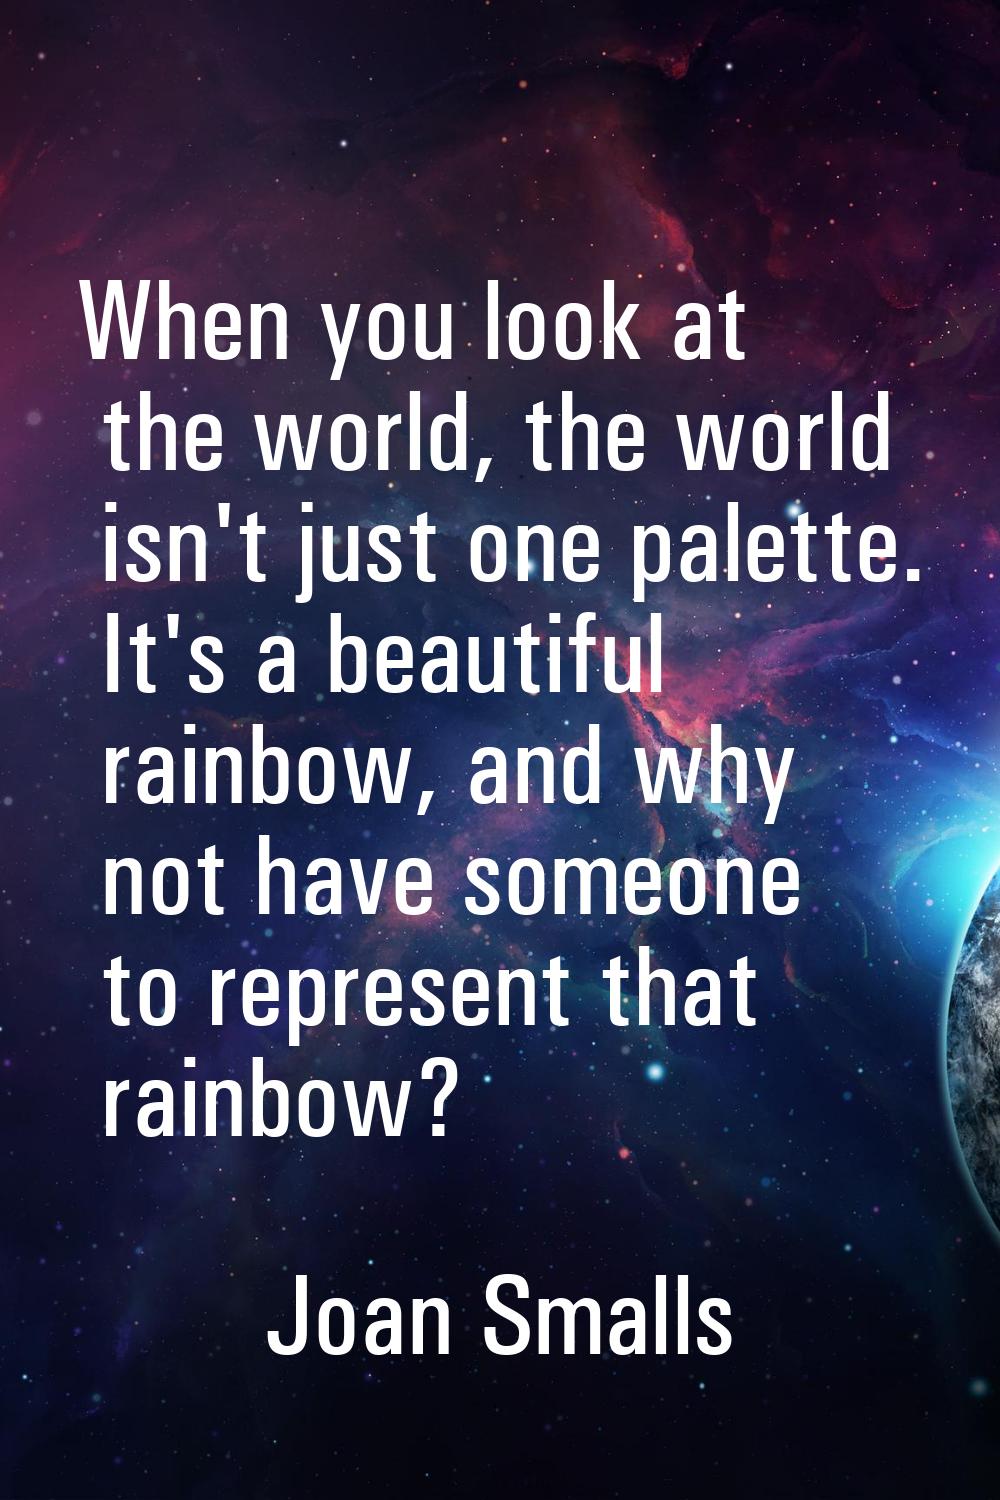 When you look at the world, the world isn't just one palette. It's a beautiful rainbow, and why not